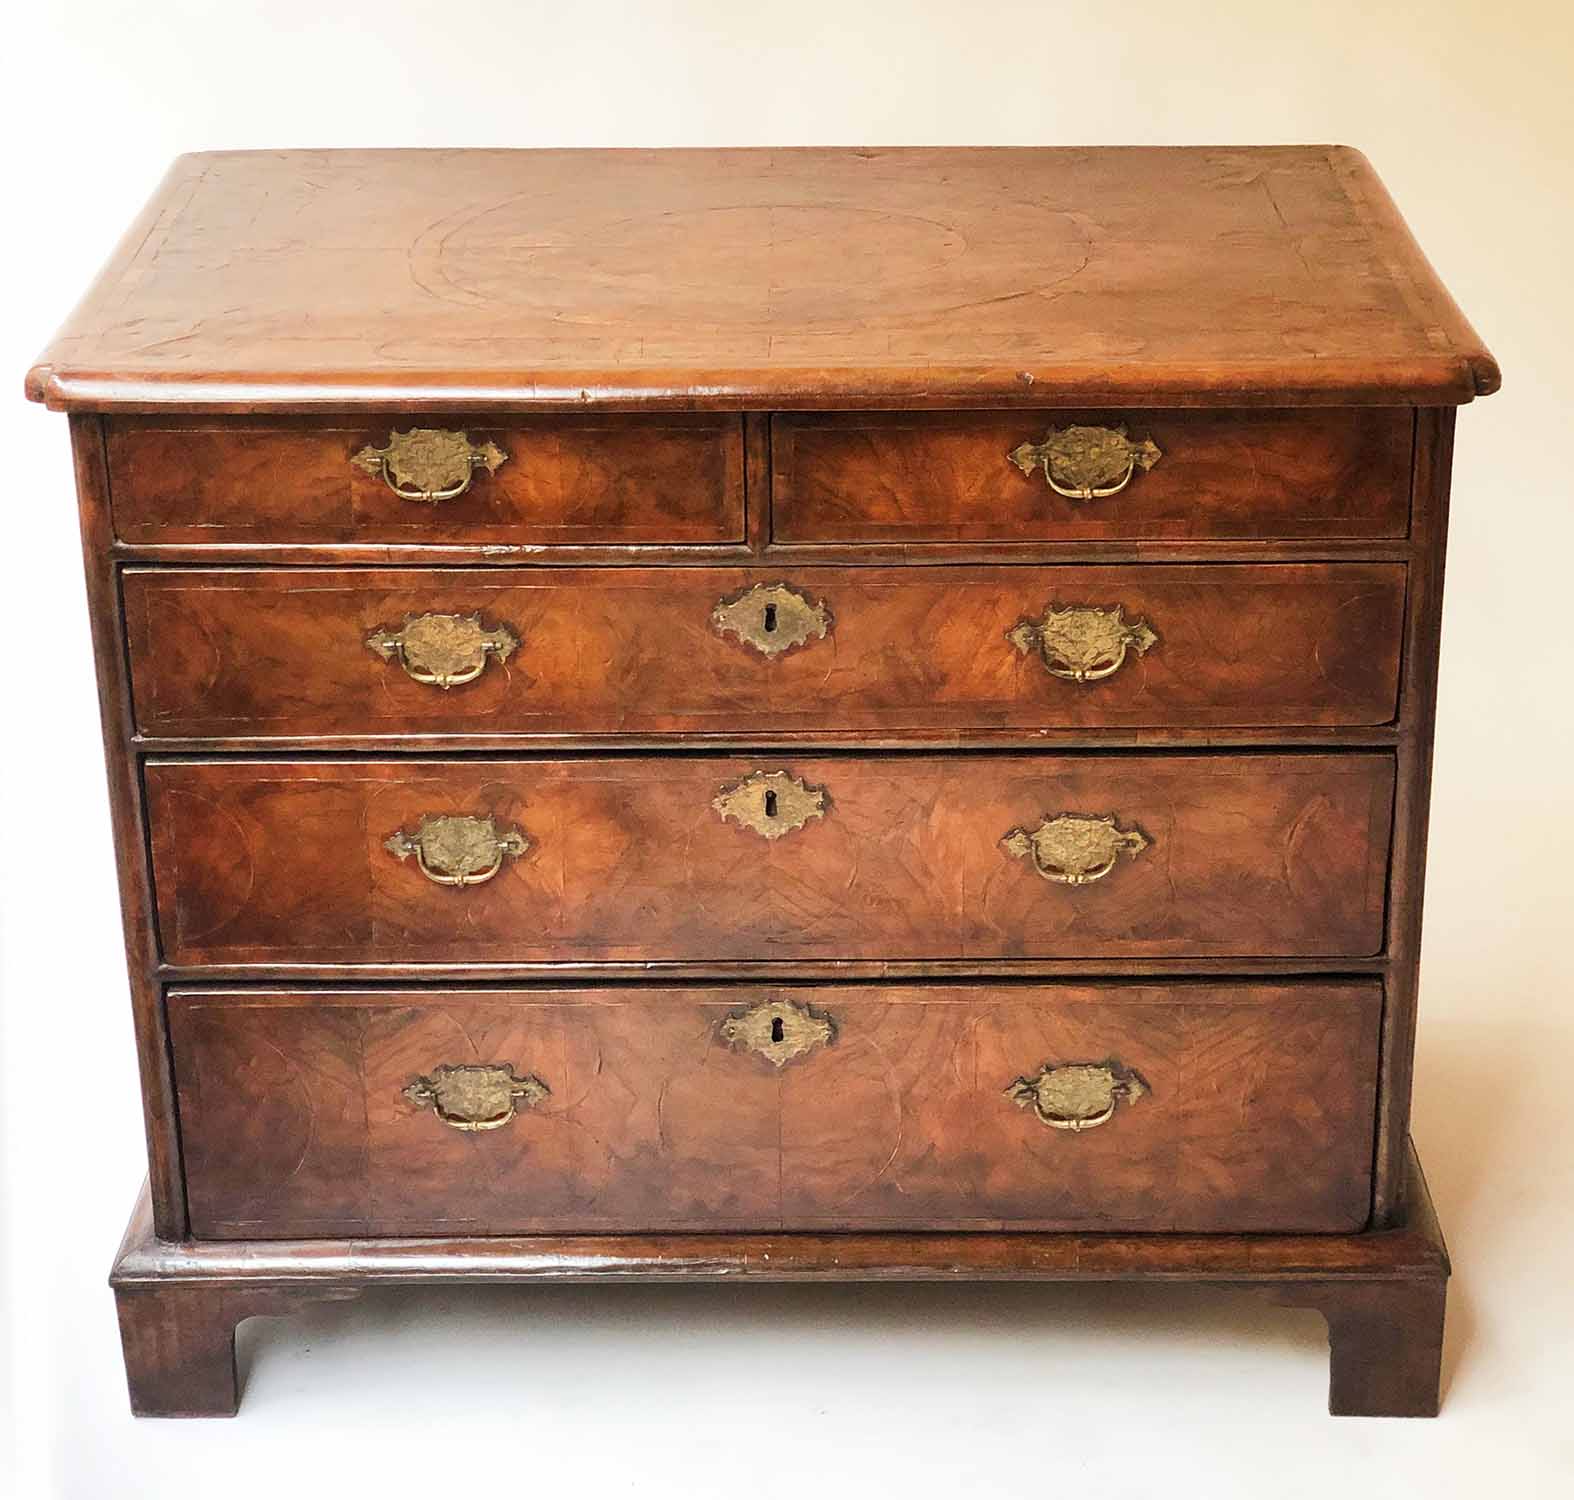 CHEST, 18th century English Queen Anne figured walnut with two short and three long drawers, - Image 2 of 4